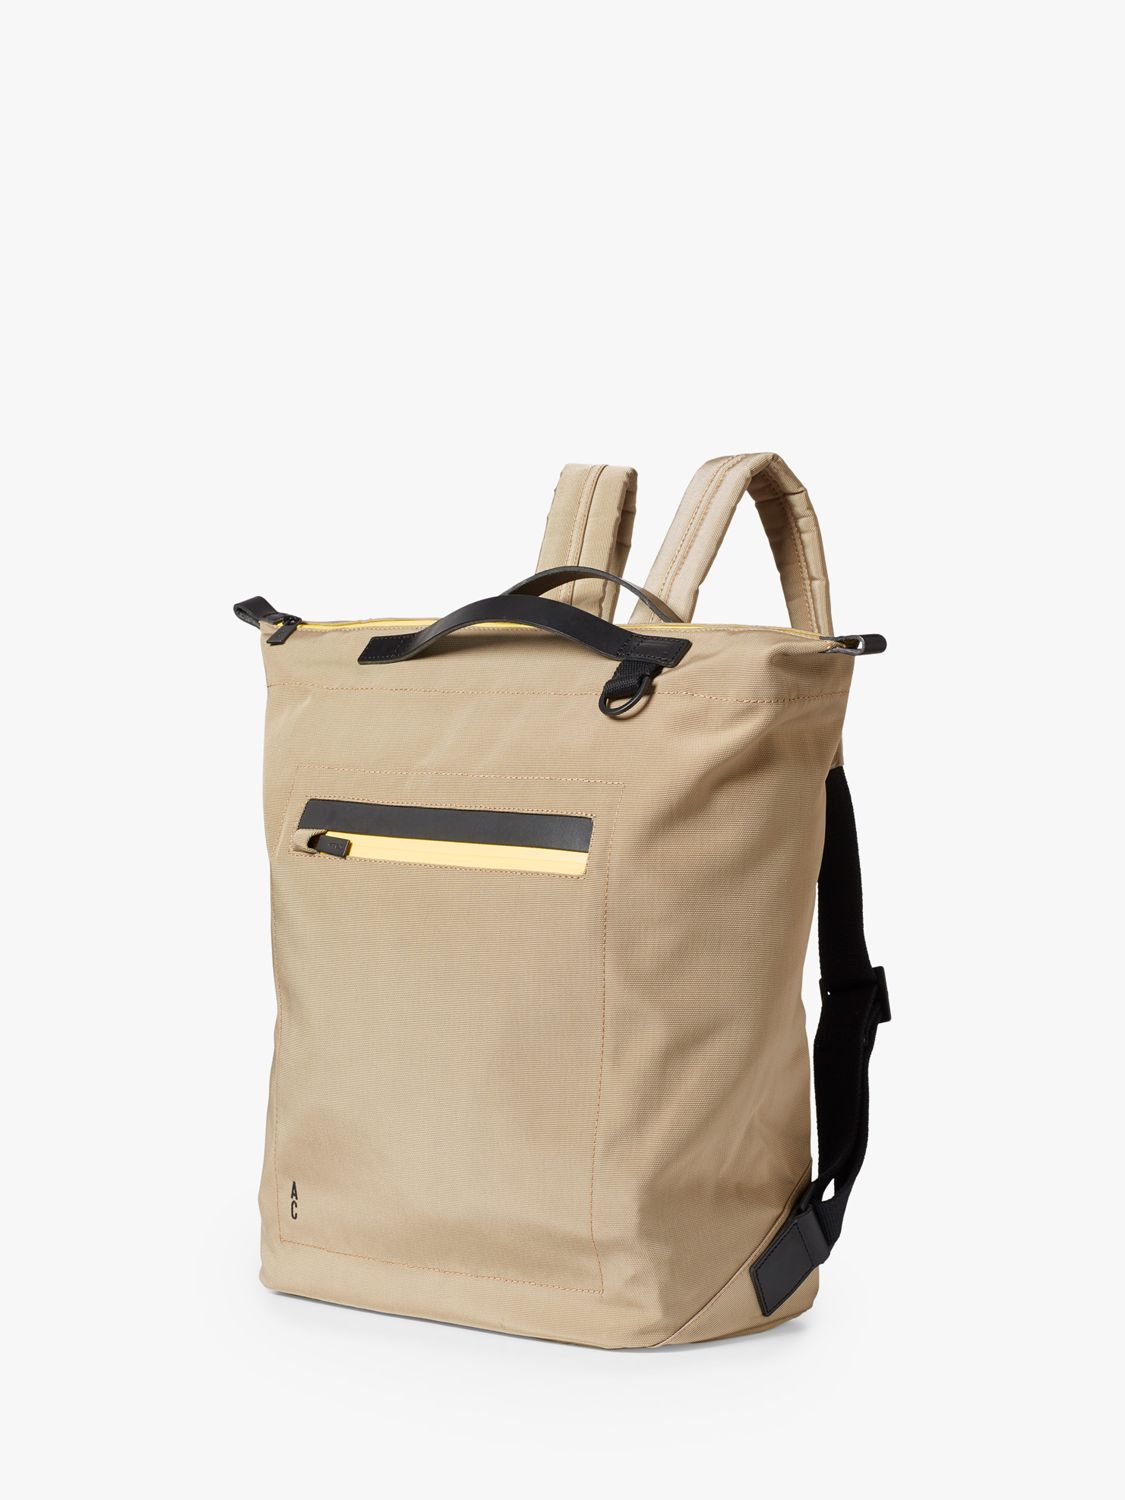 Buy Ally Capellino Hoy Travel Cycle Recycled Rucksack Online at johnlewis.com